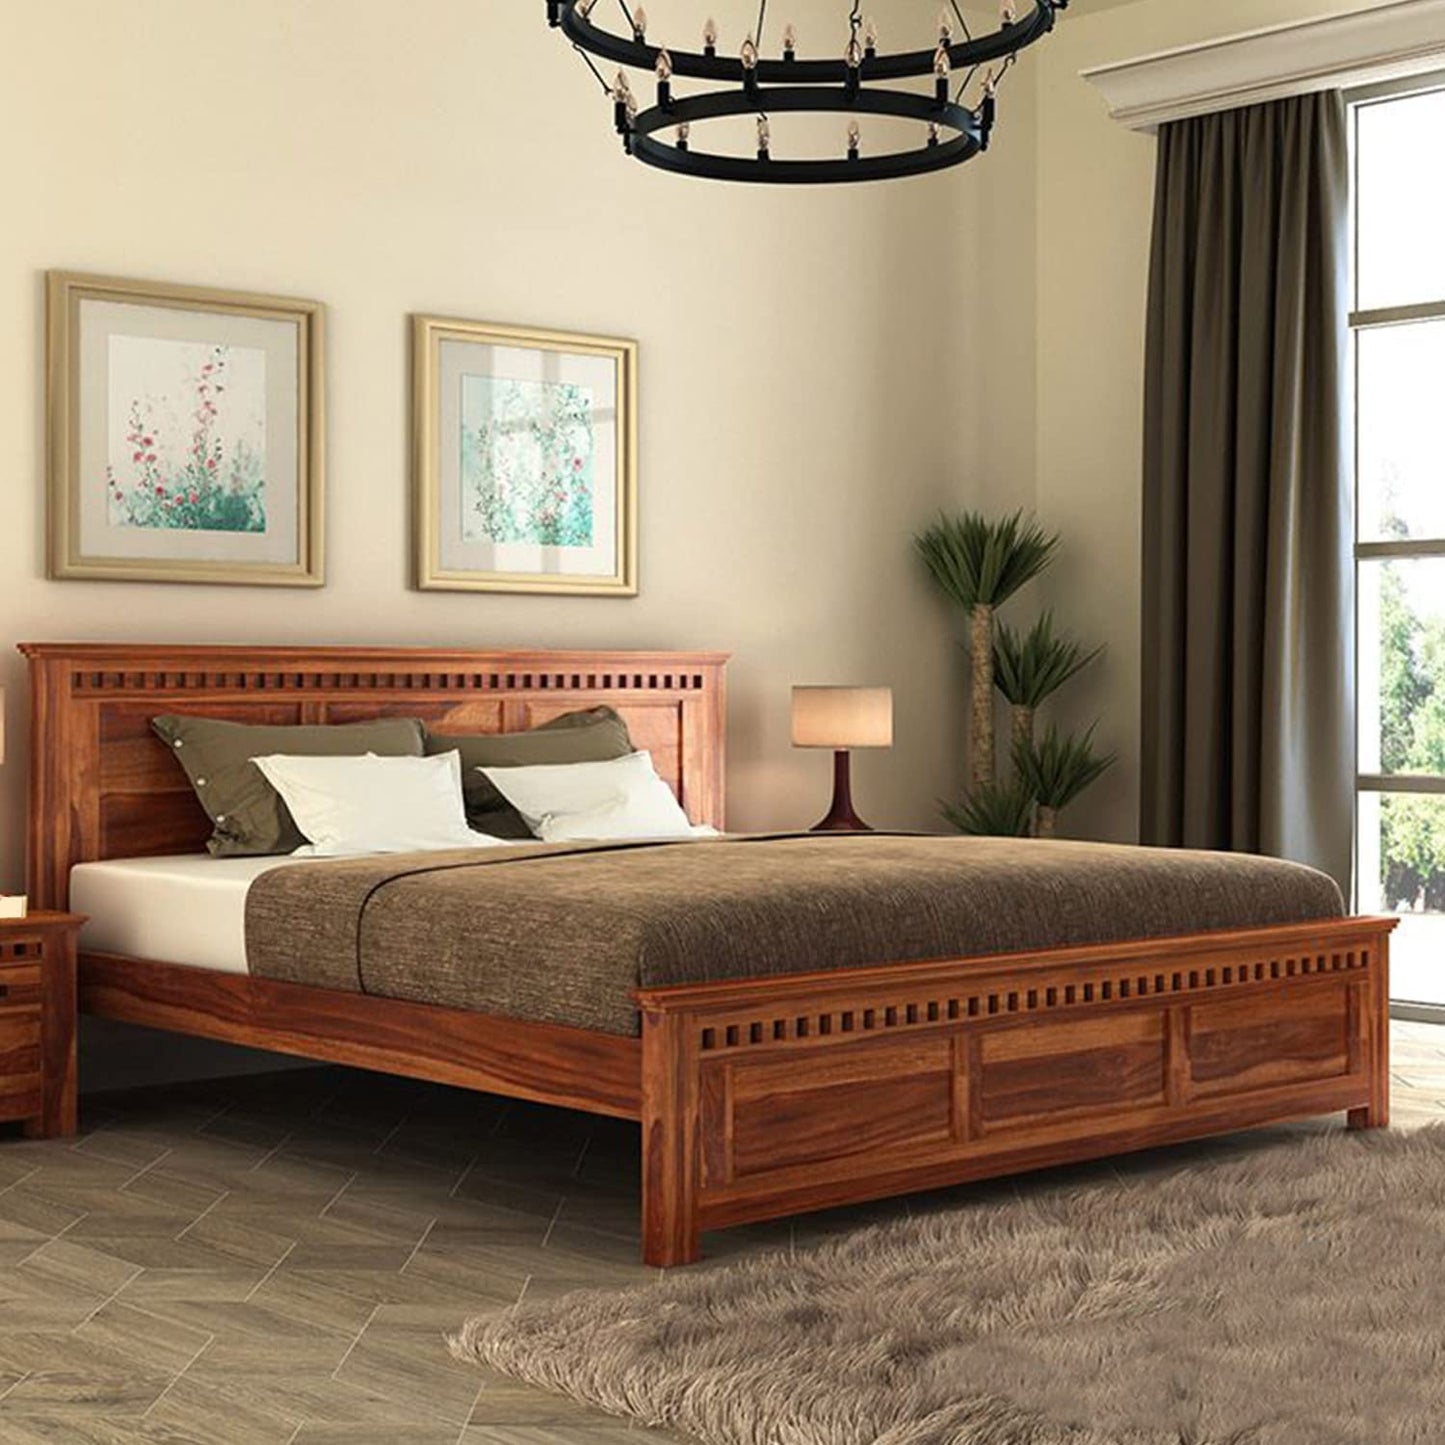 Weehom Furniture - Kuber Solid Wood Sheesham Bed | Without Storage